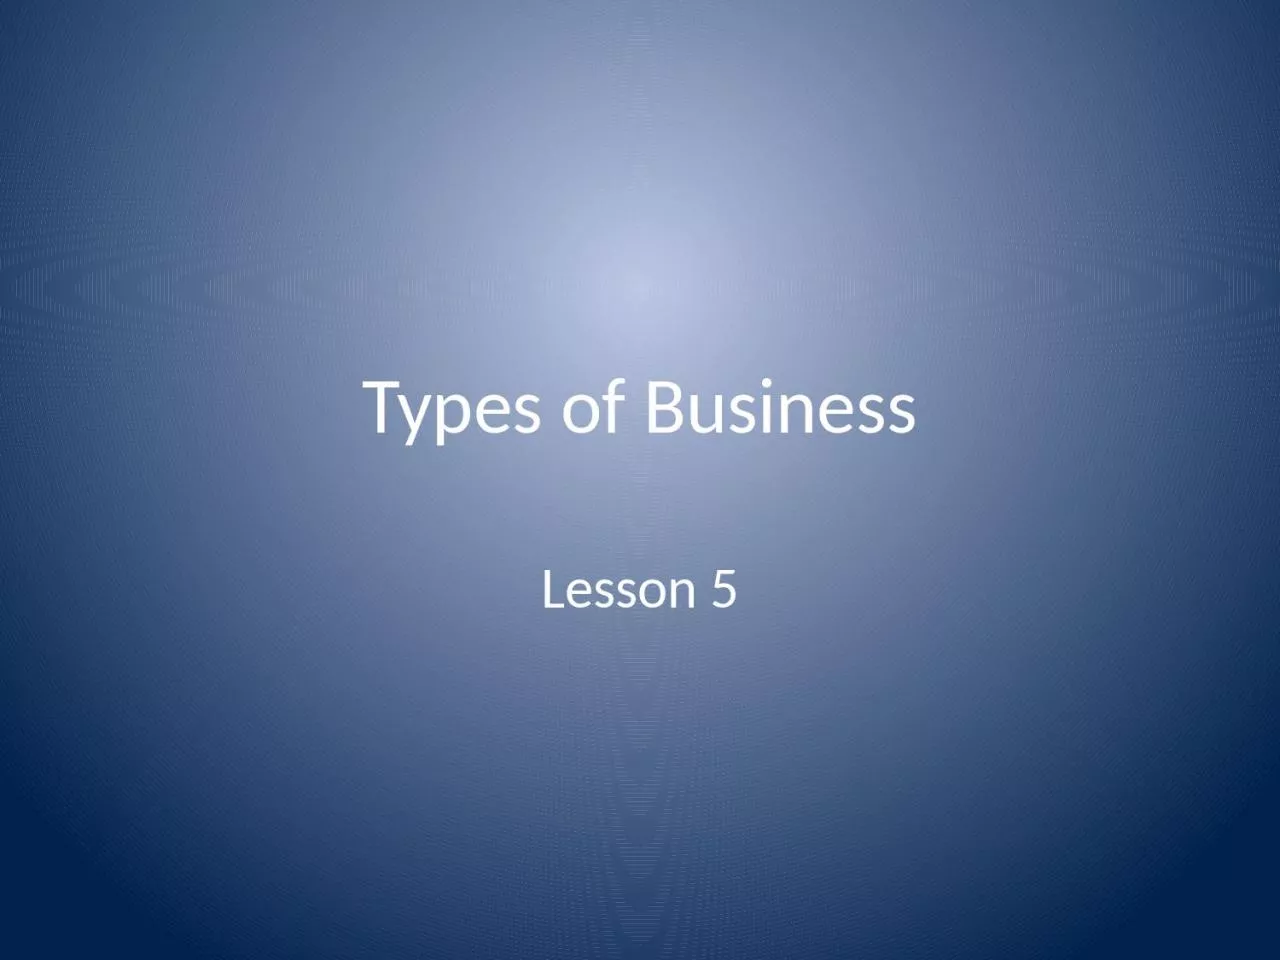 Types of Business Lesson 5